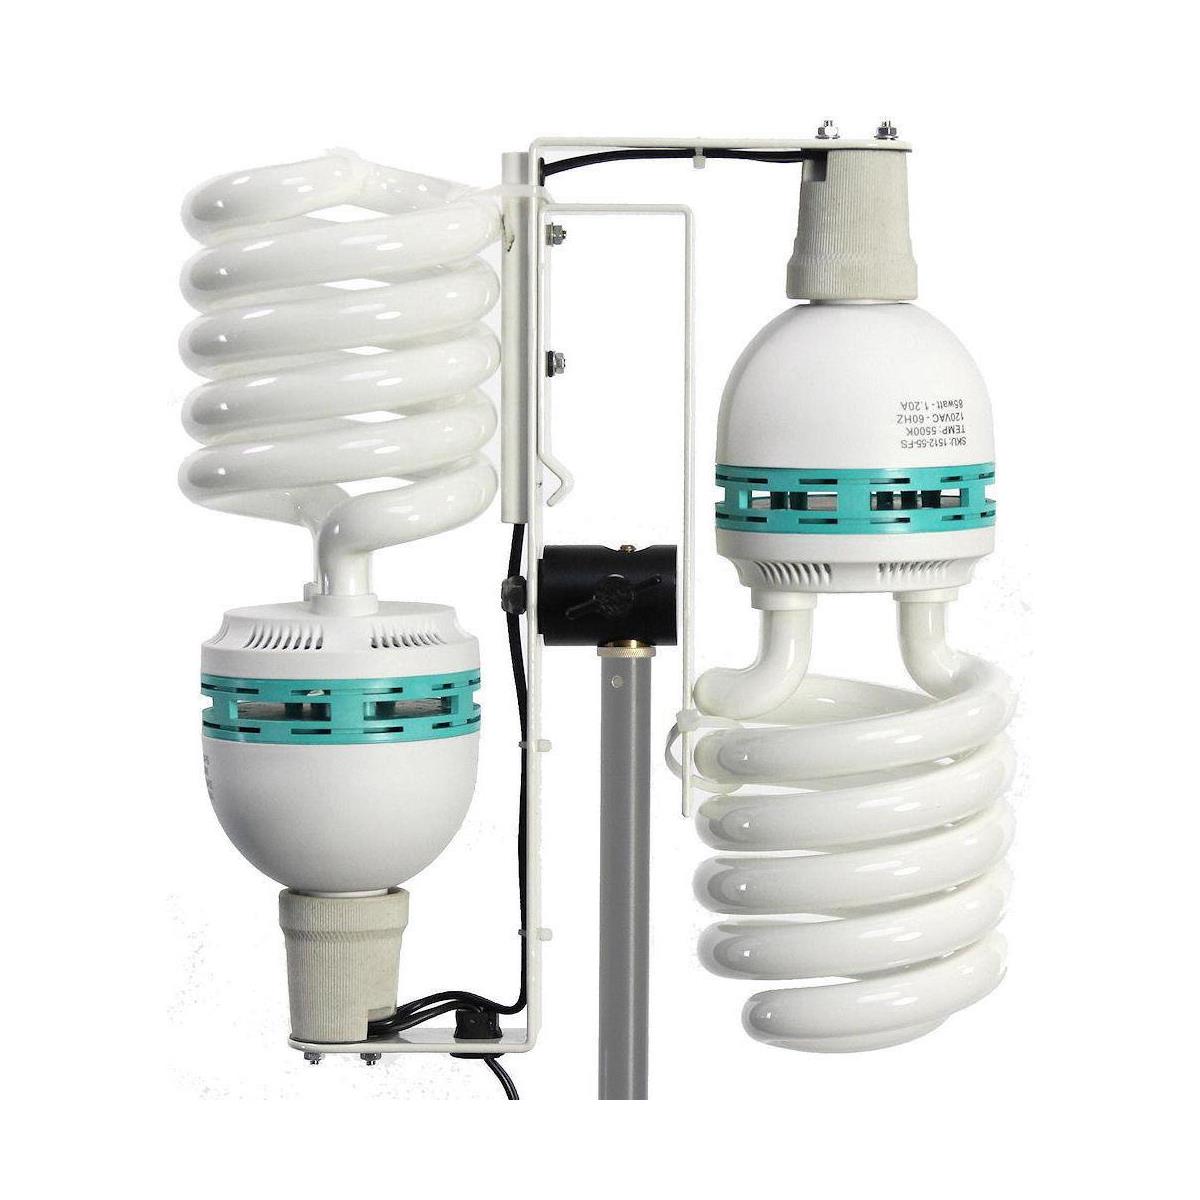 Image of Alzo Digital 200 CFL Video Light with 5500K Bulb